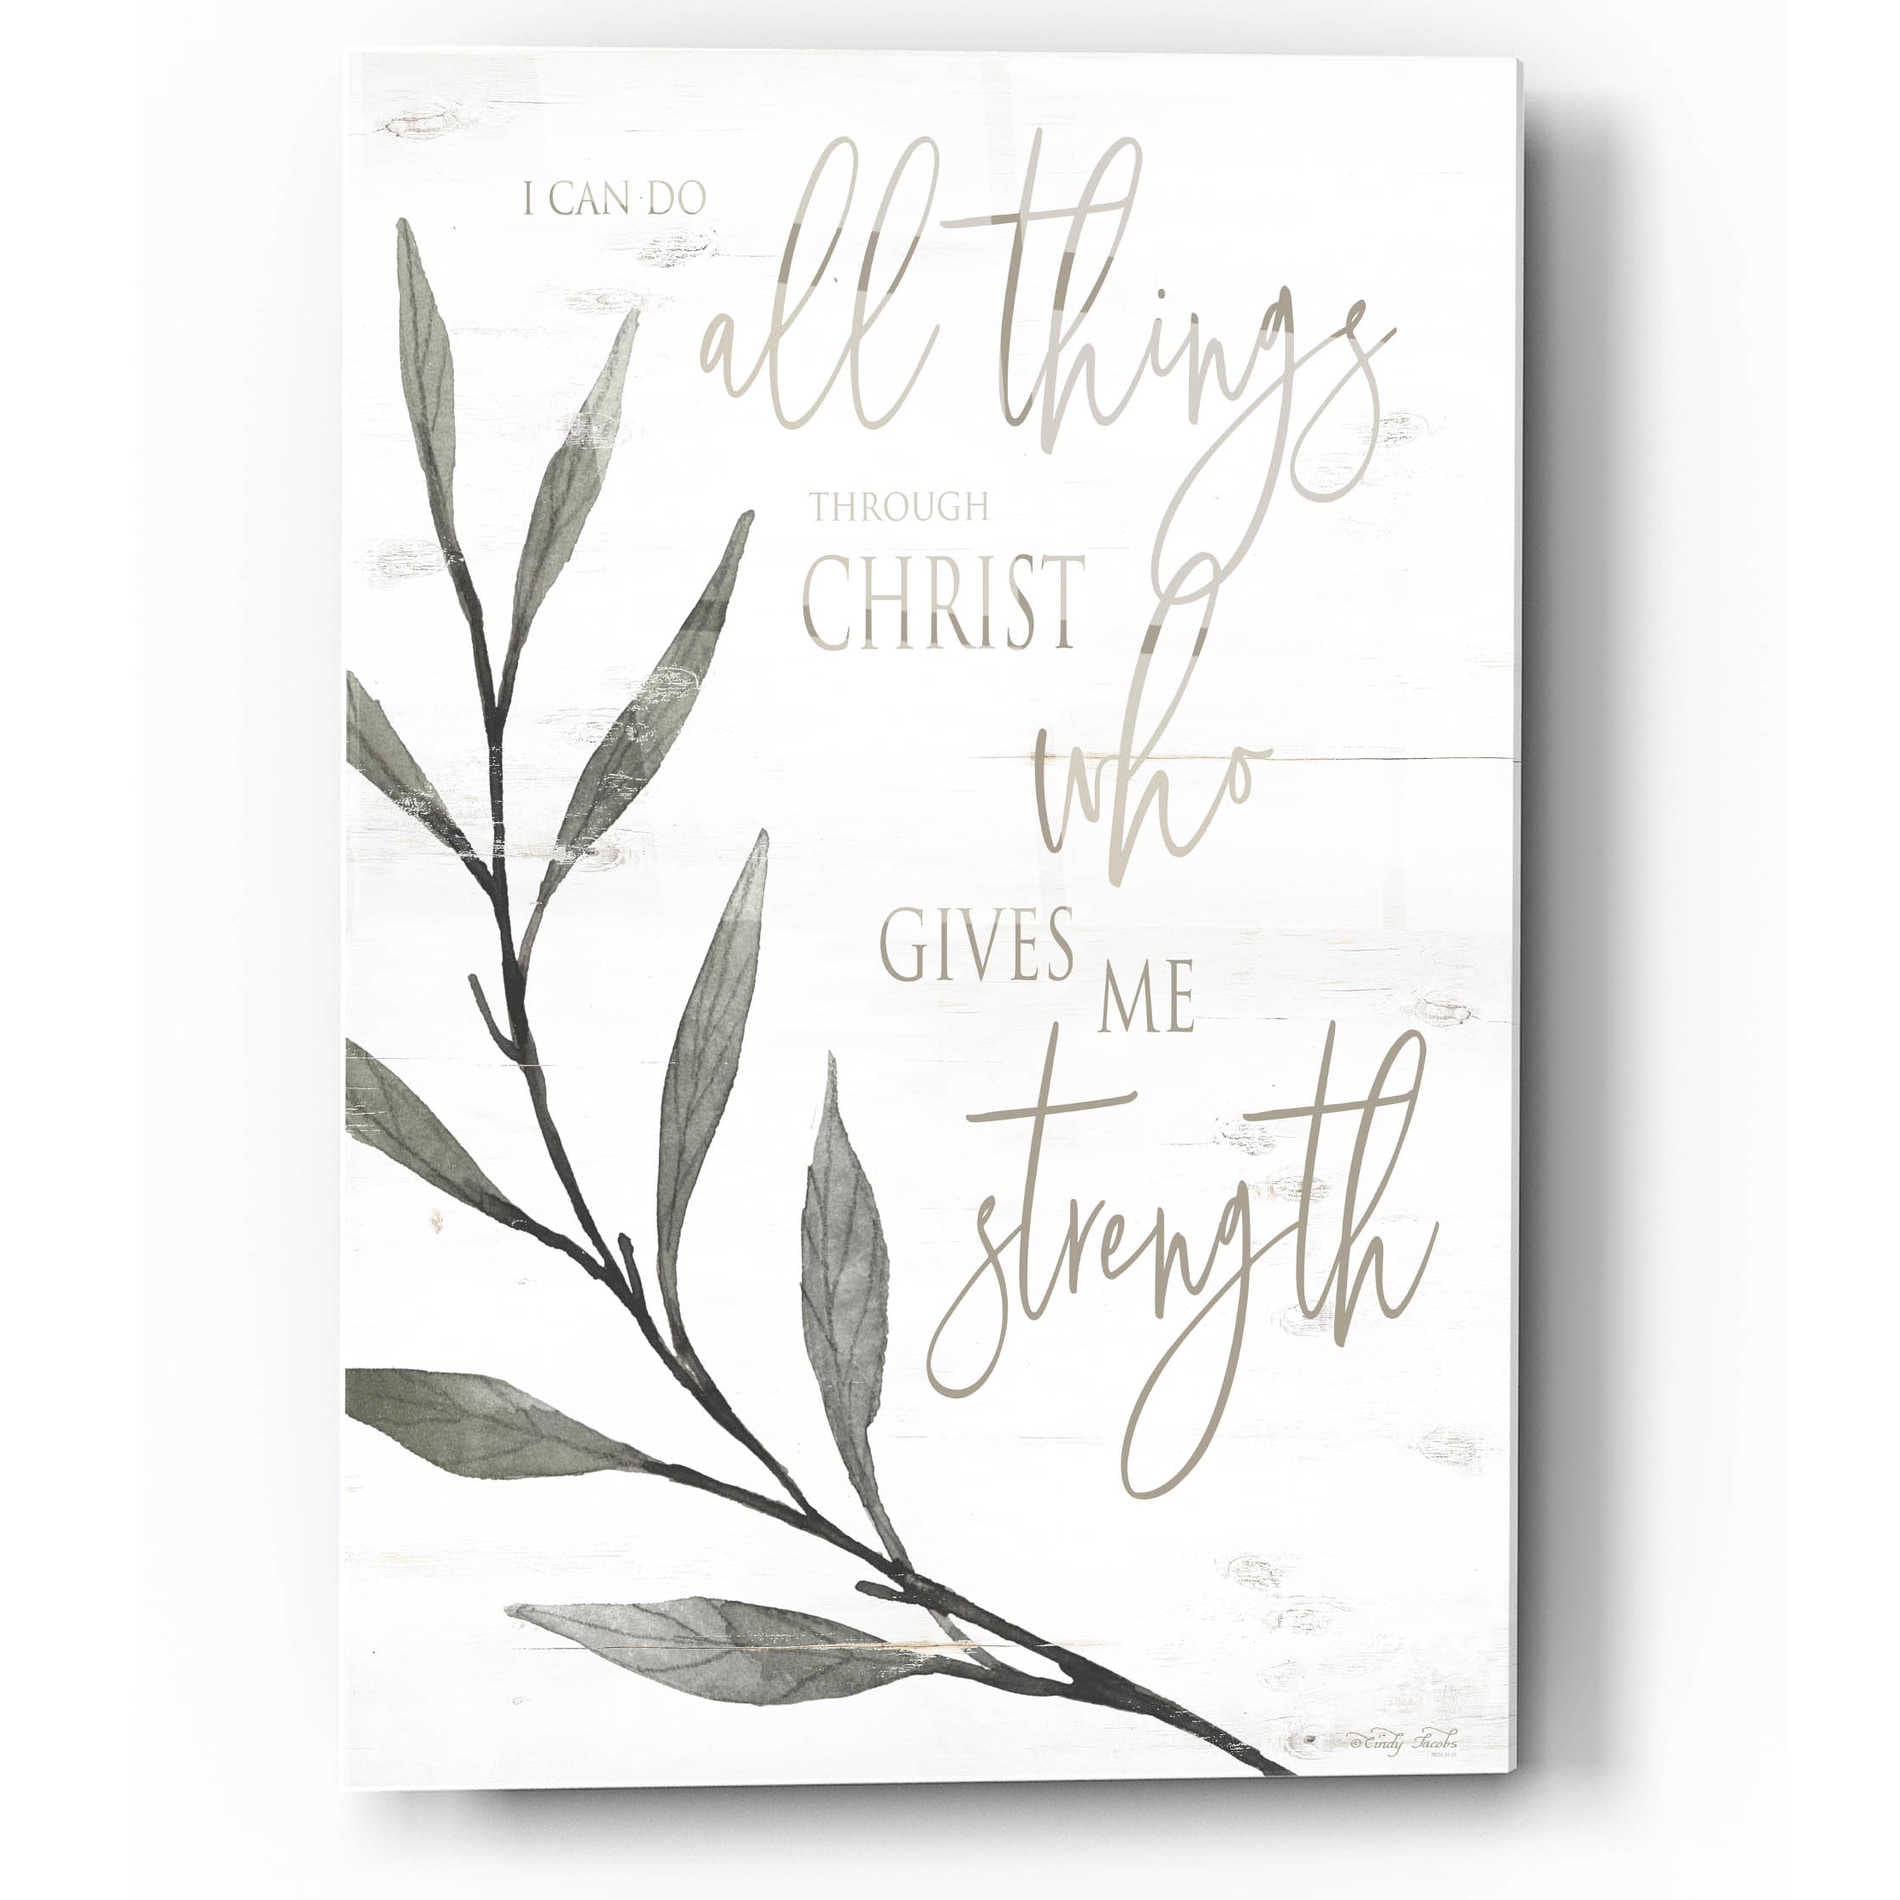 Epic Art 'I Can Do All Things Through Christ' by Cindy Jacobs, Acrylic Glass Wall Art,12x16